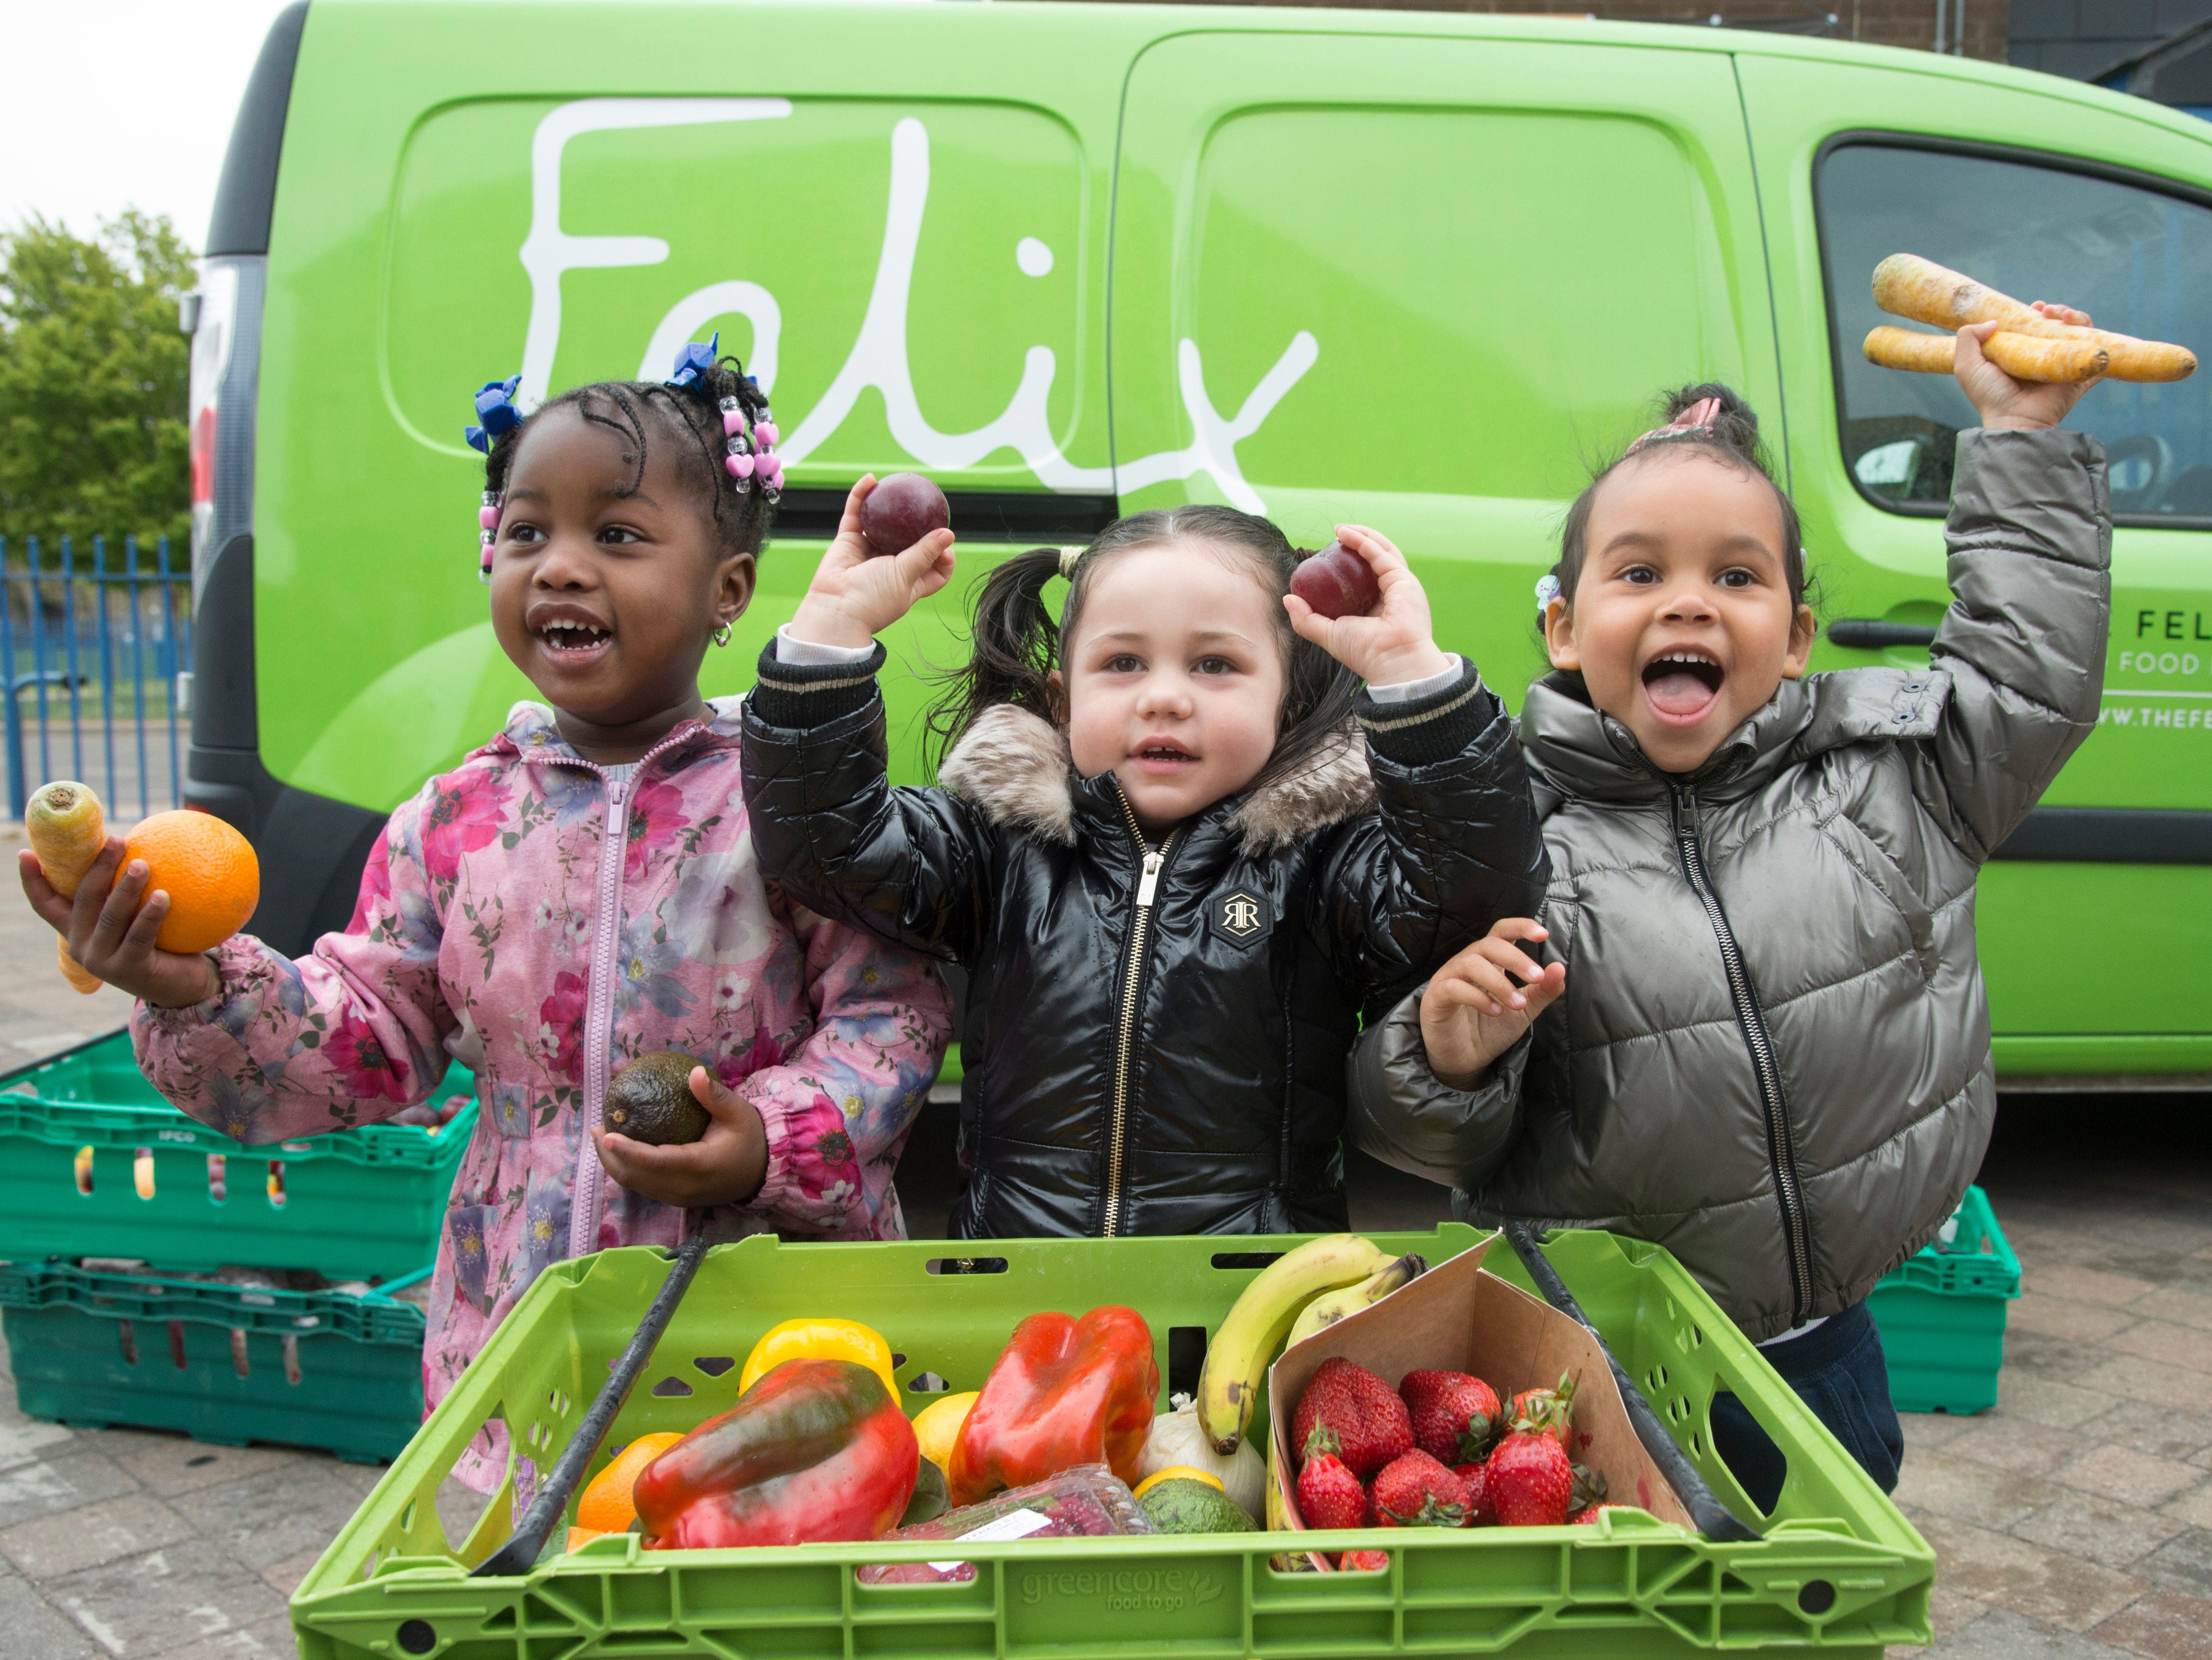 Dream, Aaliyah and Eva Rosie with fruit and veg provided by The Felix Project